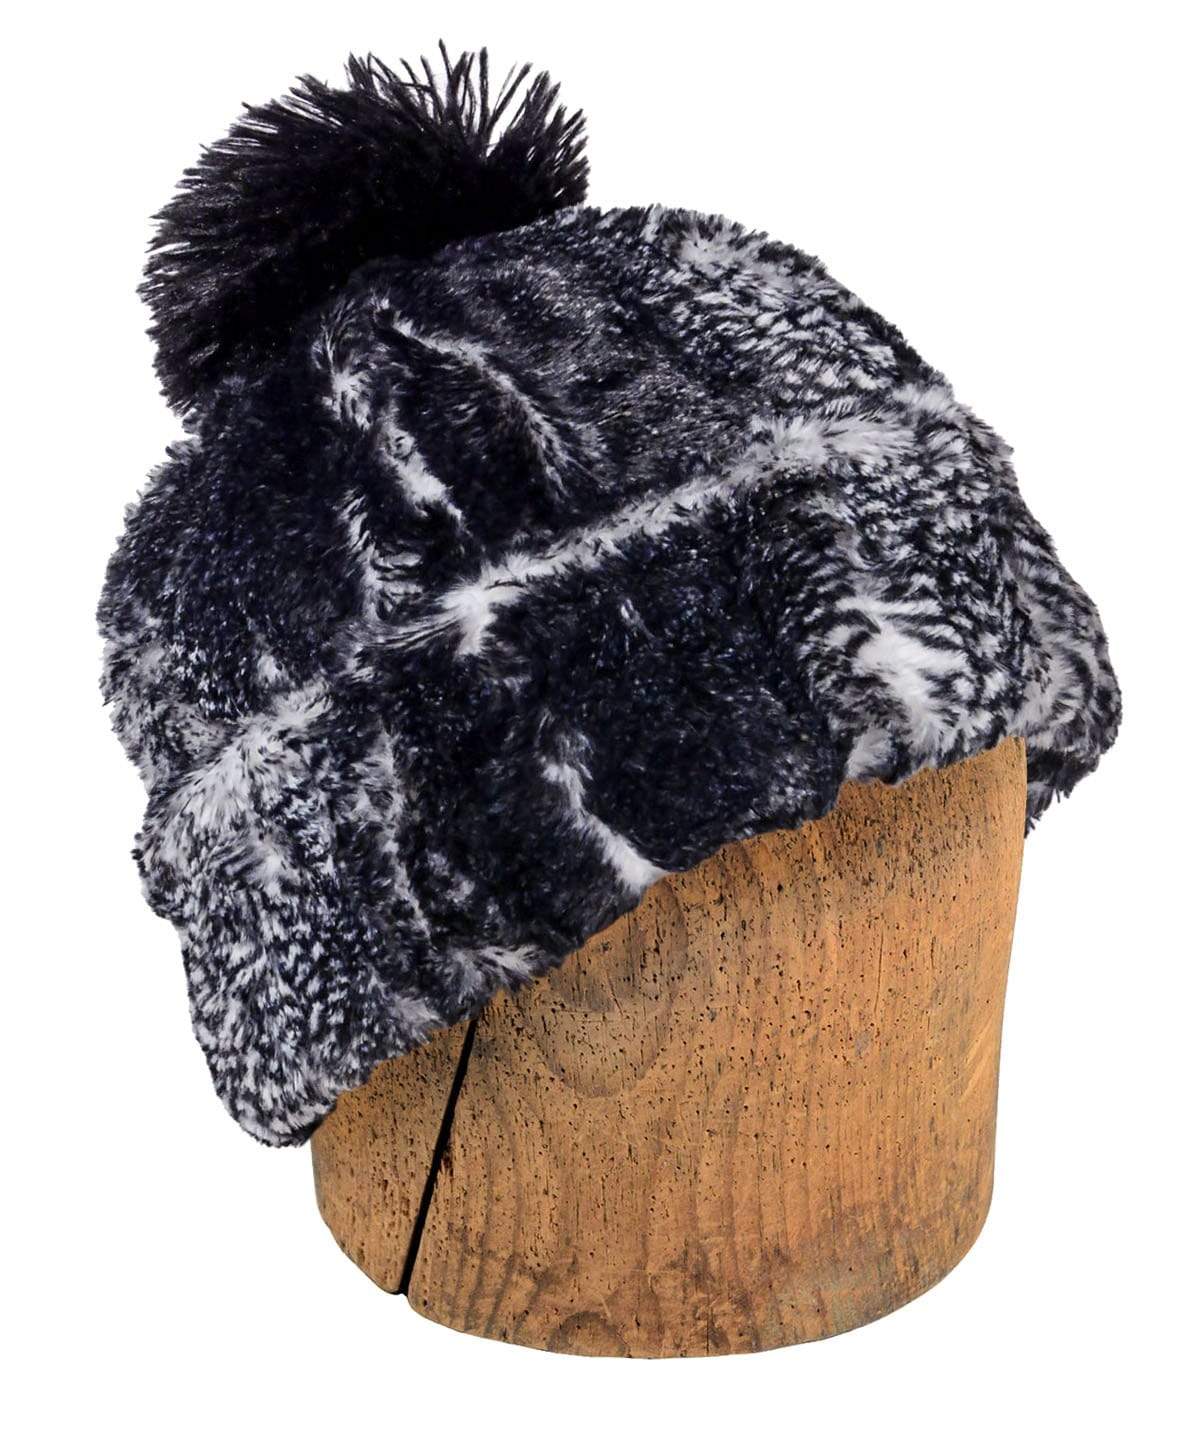 Men&#39;s Beanie Hat with Black Pom | Black Mamba, Black and White Snake print Faux Fur | Handmade in the USA by Pandemonium Seattle